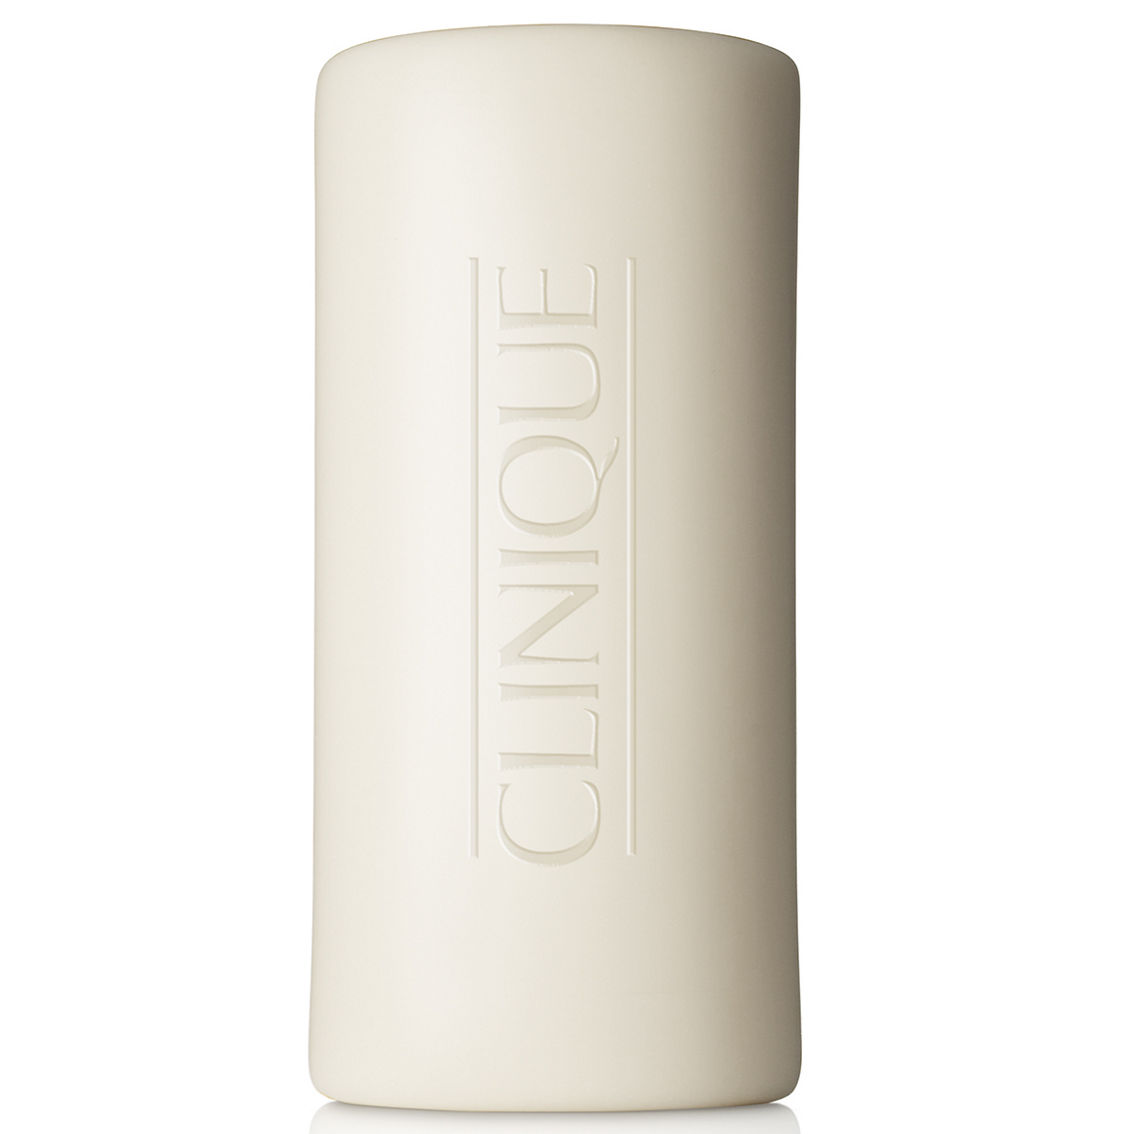 Clinique Acne Solutions Cleansing Bar for Face and Body - Image 2 of 7